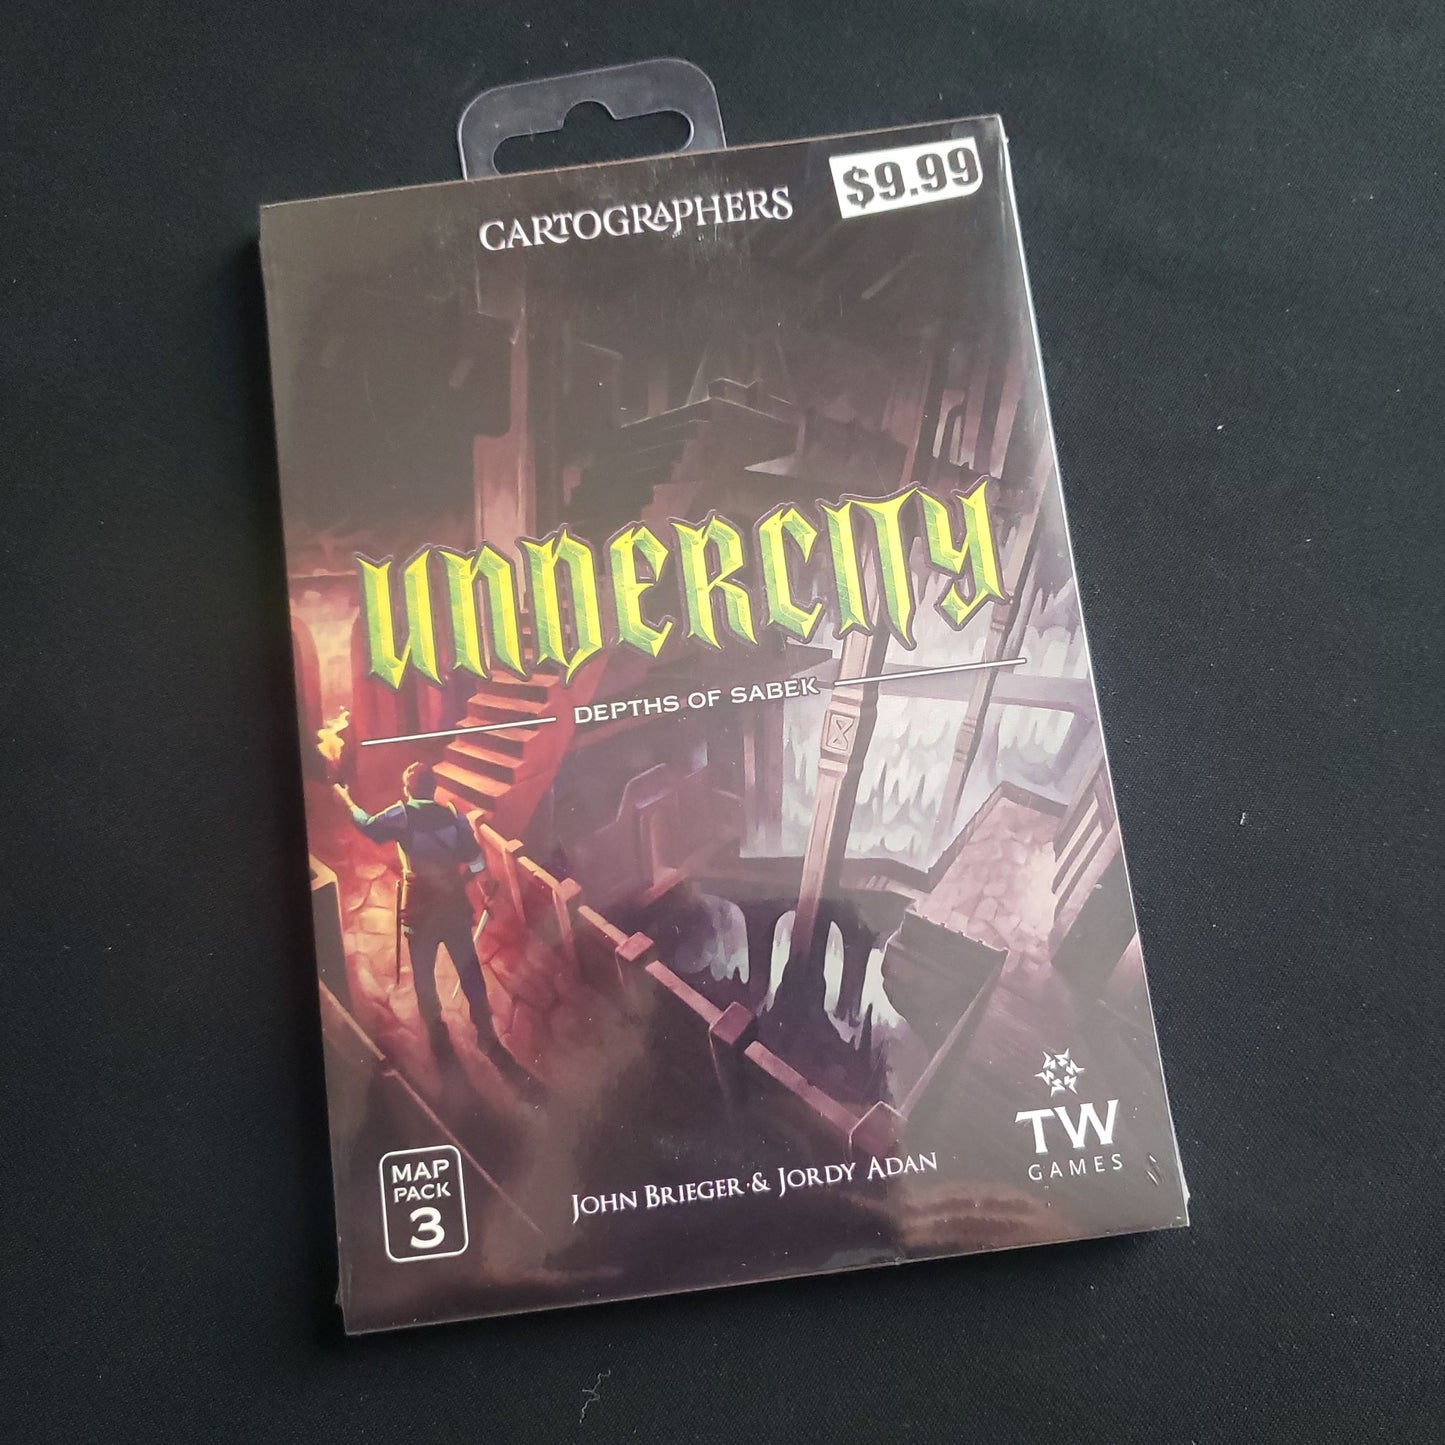 Cartographers map pack expansion 3 - undercity, depths of sabek - front cover of package